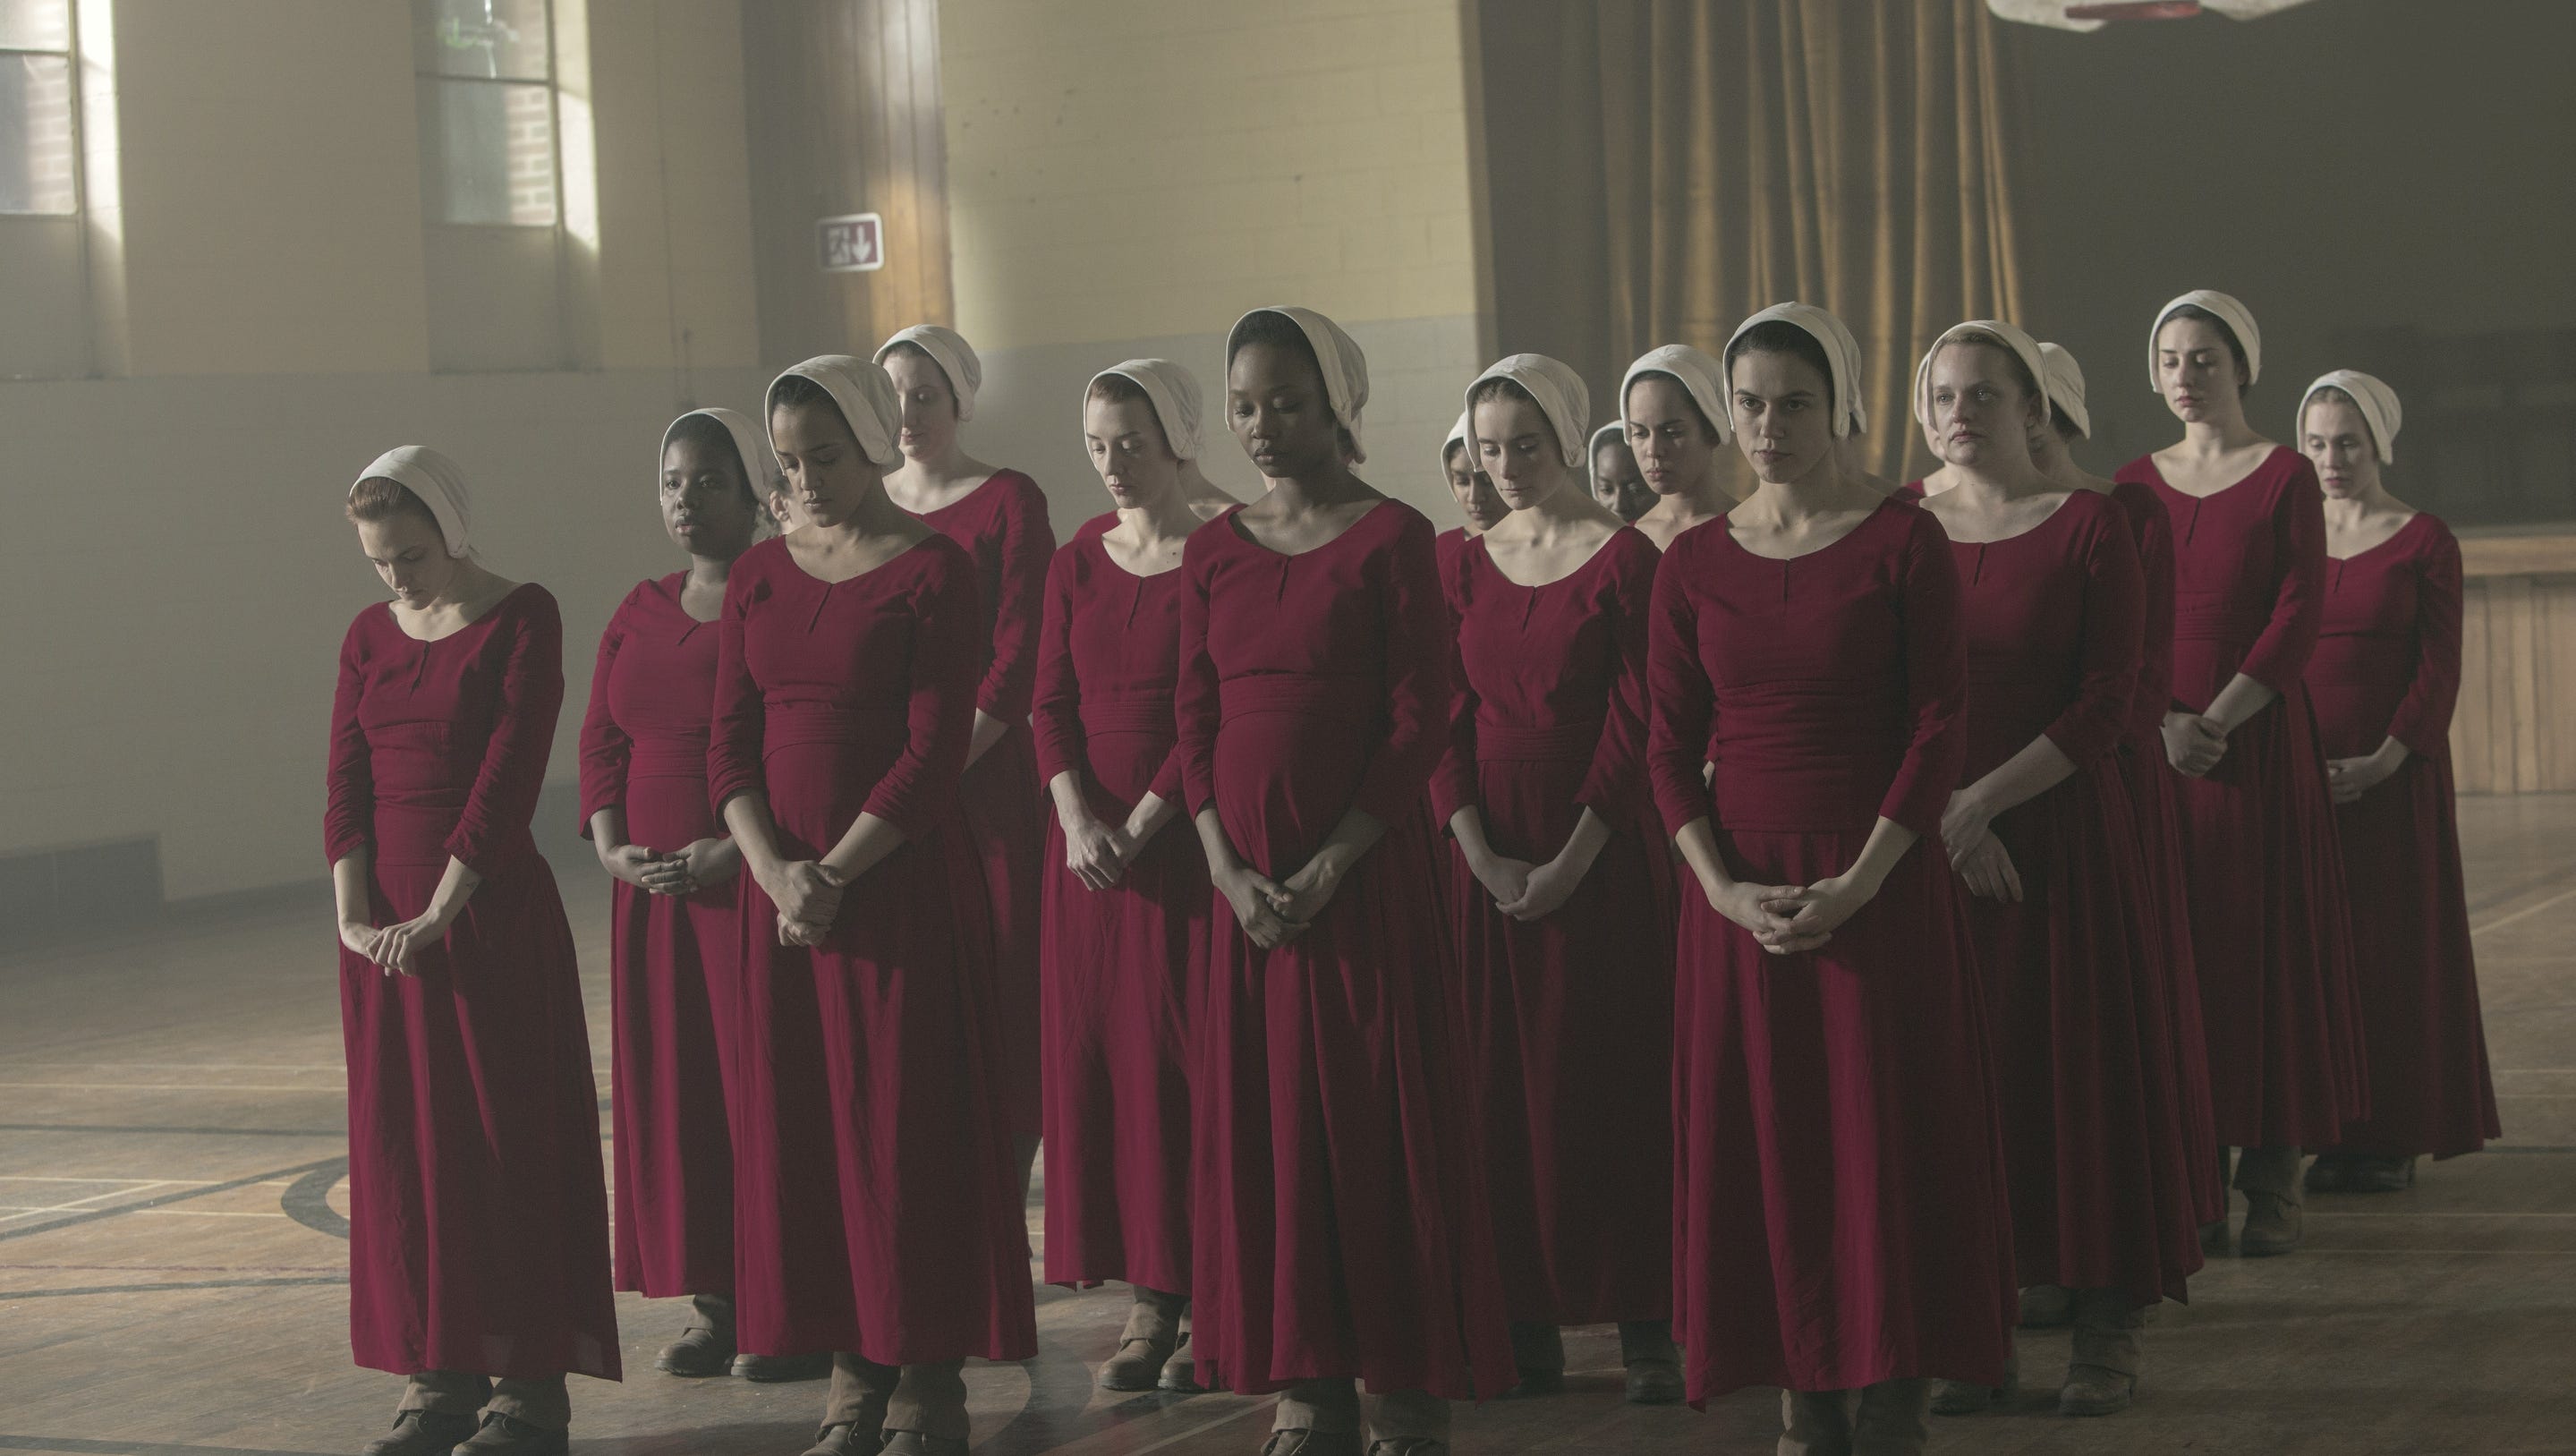 Why Is It Important That Millie Was In The Choir 30 Years Ago